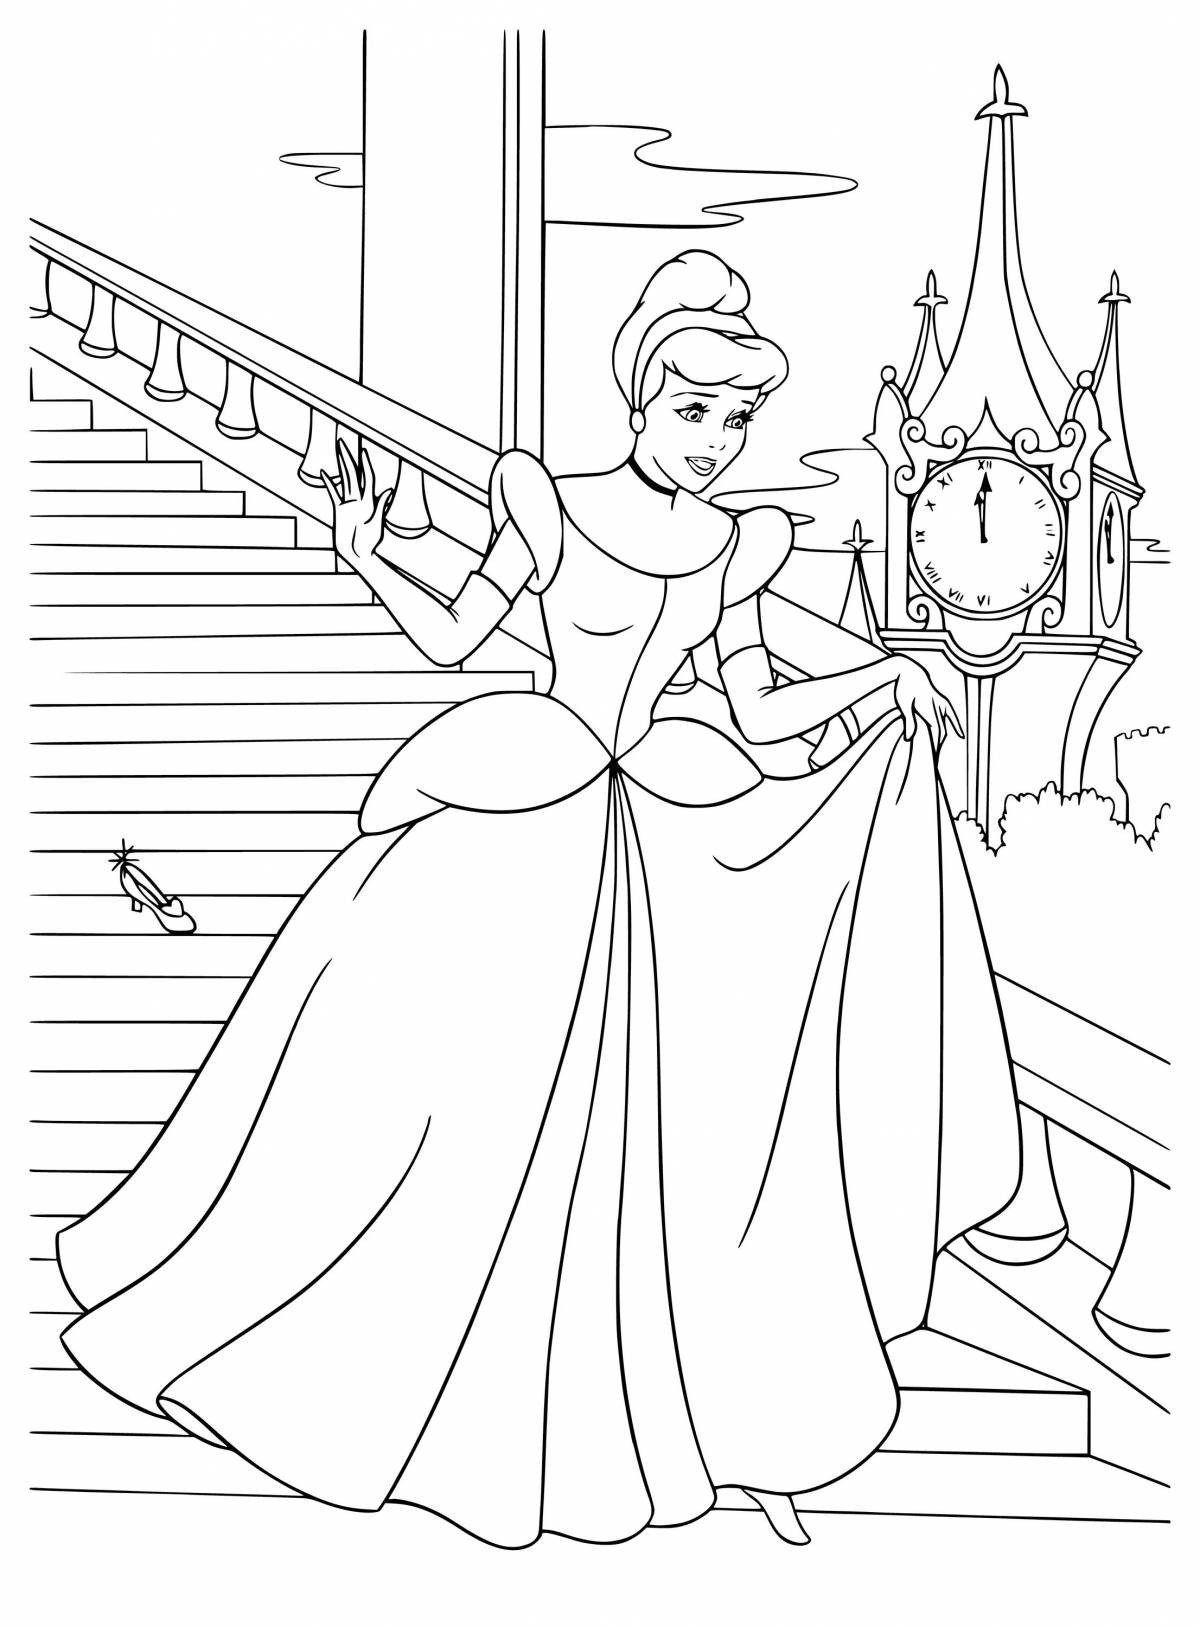 Fancy coloring include princesses